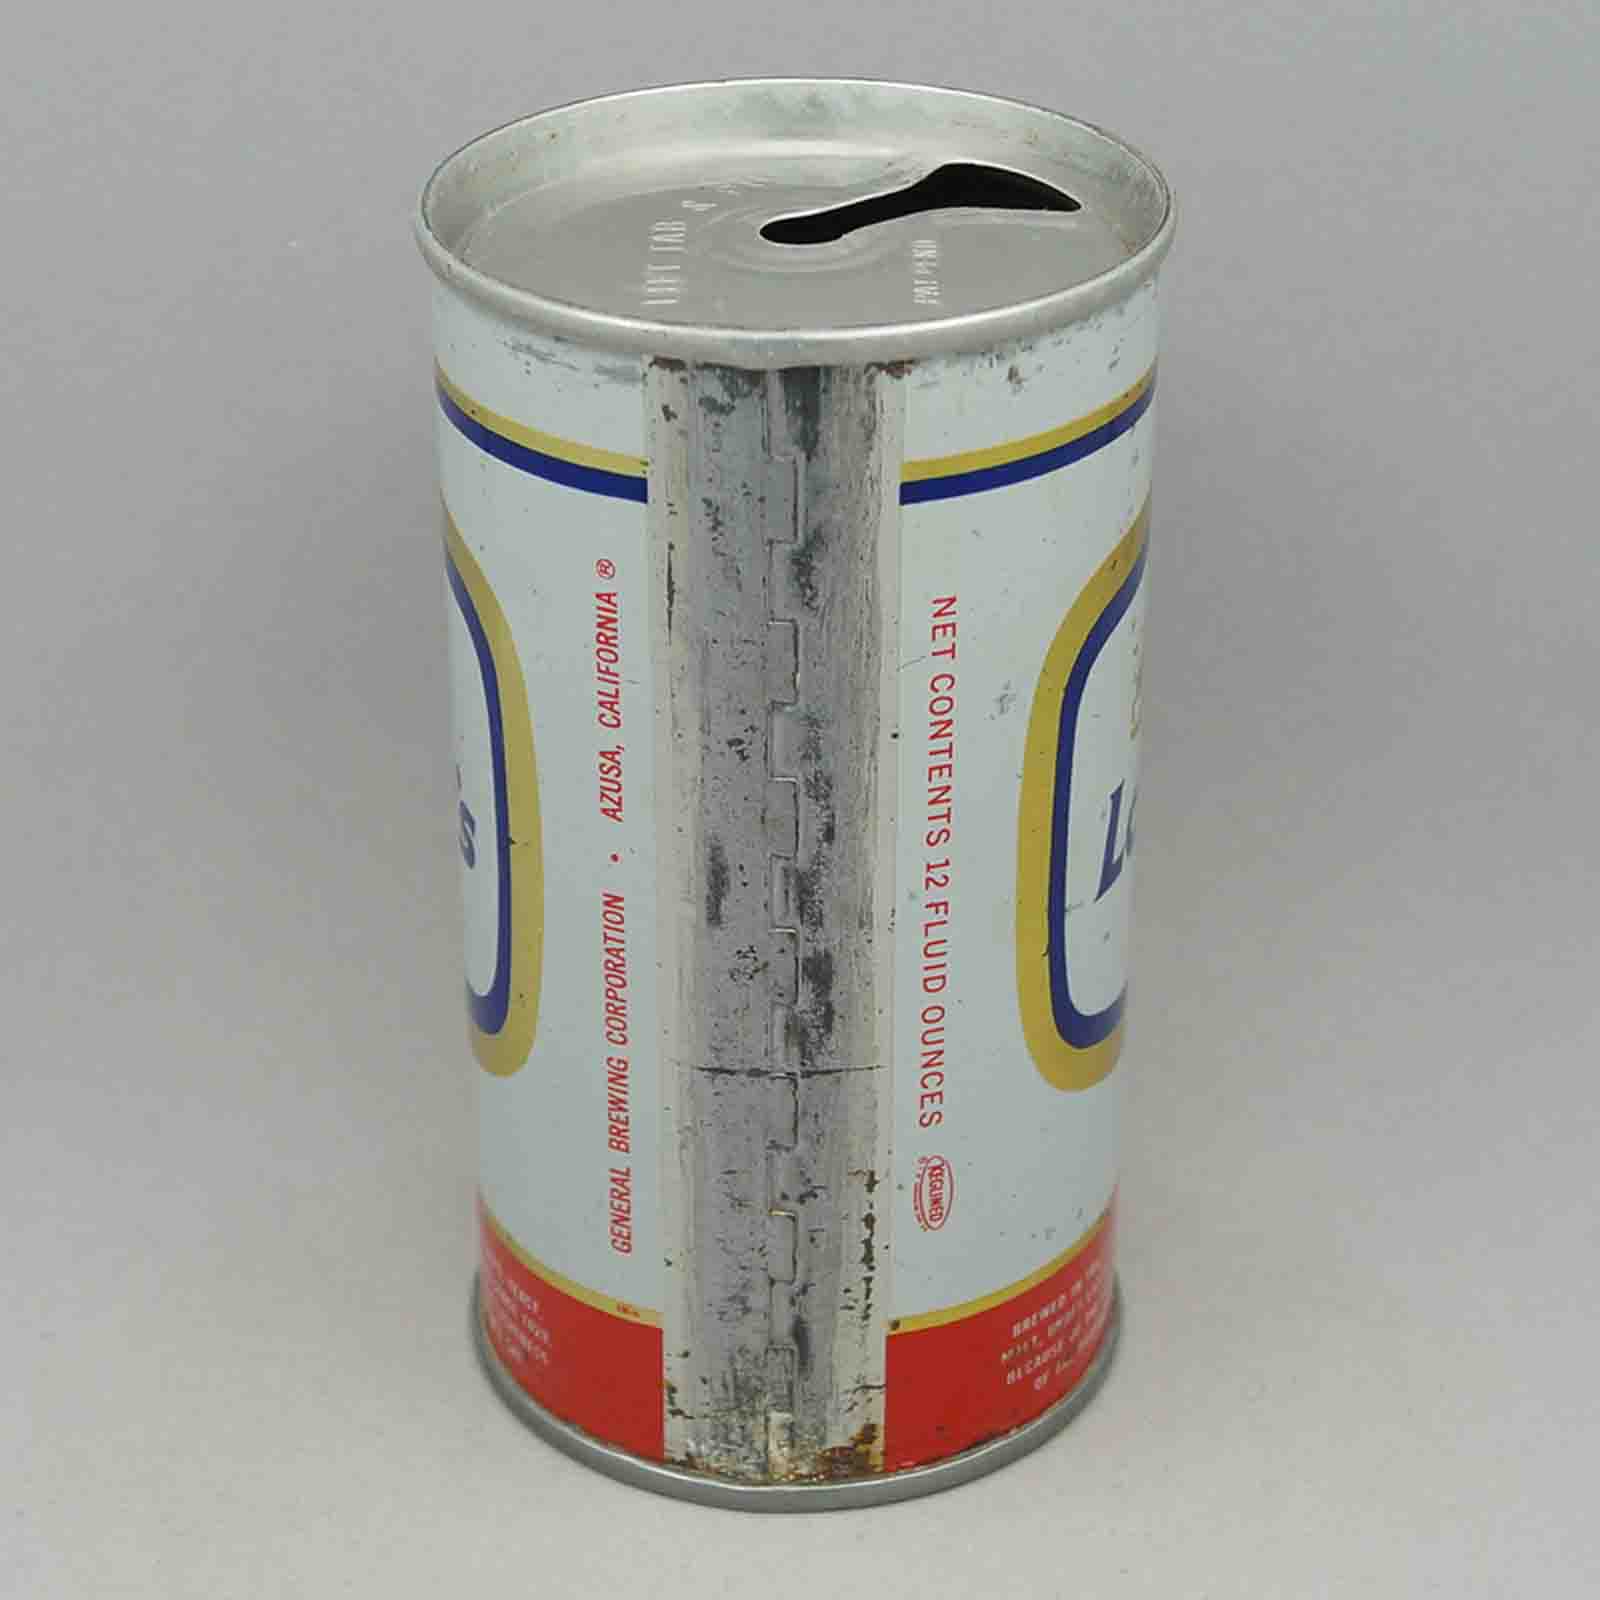 labatts 87-3 pull tab beer can 4